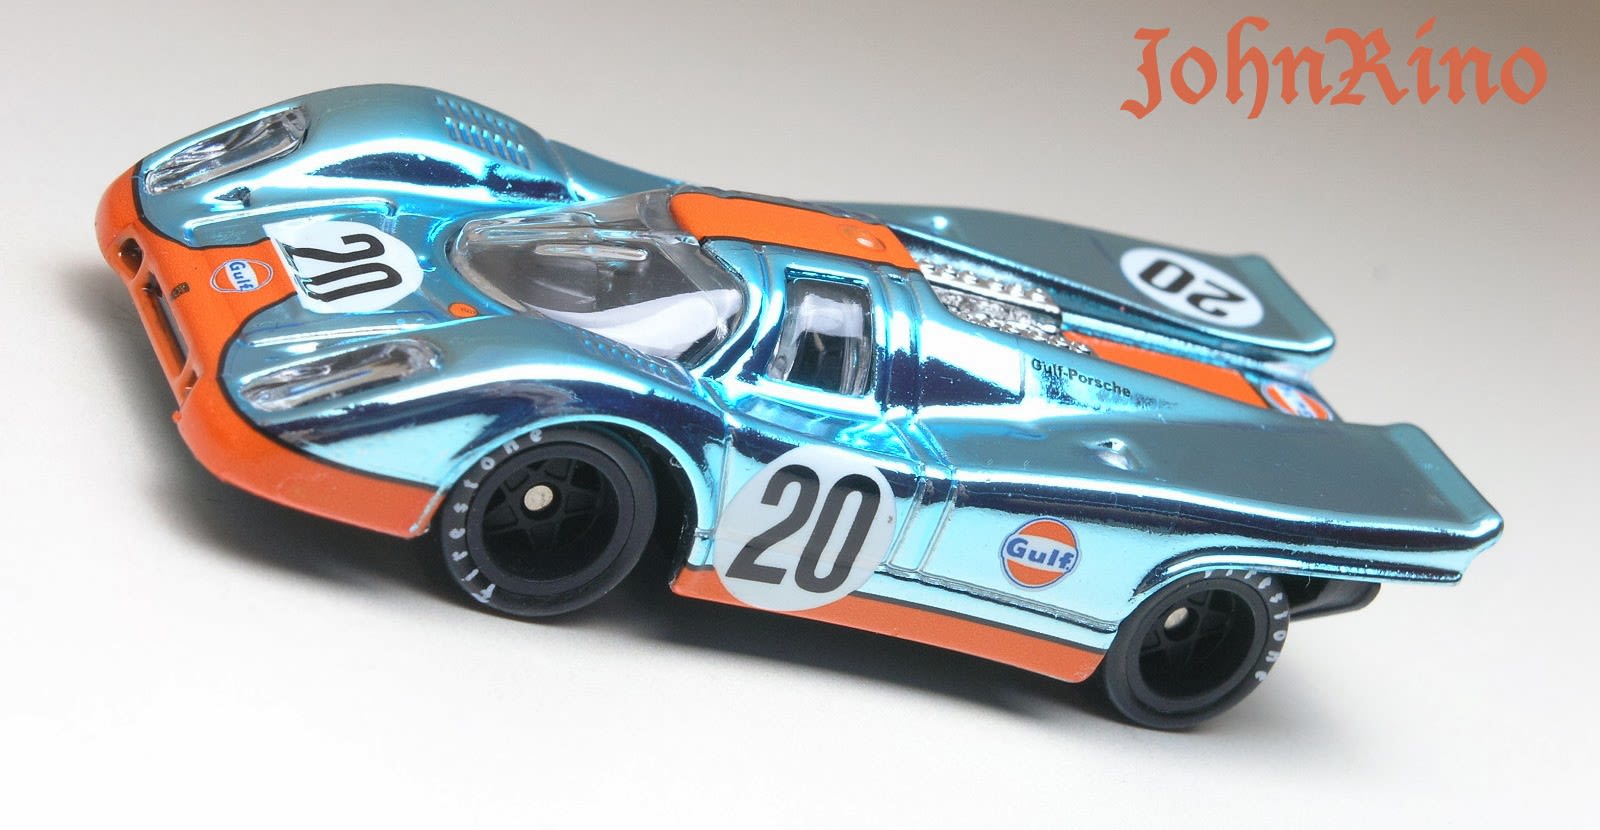 Illustration for article titled IT IS MINE: Porsche 917K Edition (keep the porsches comin!)